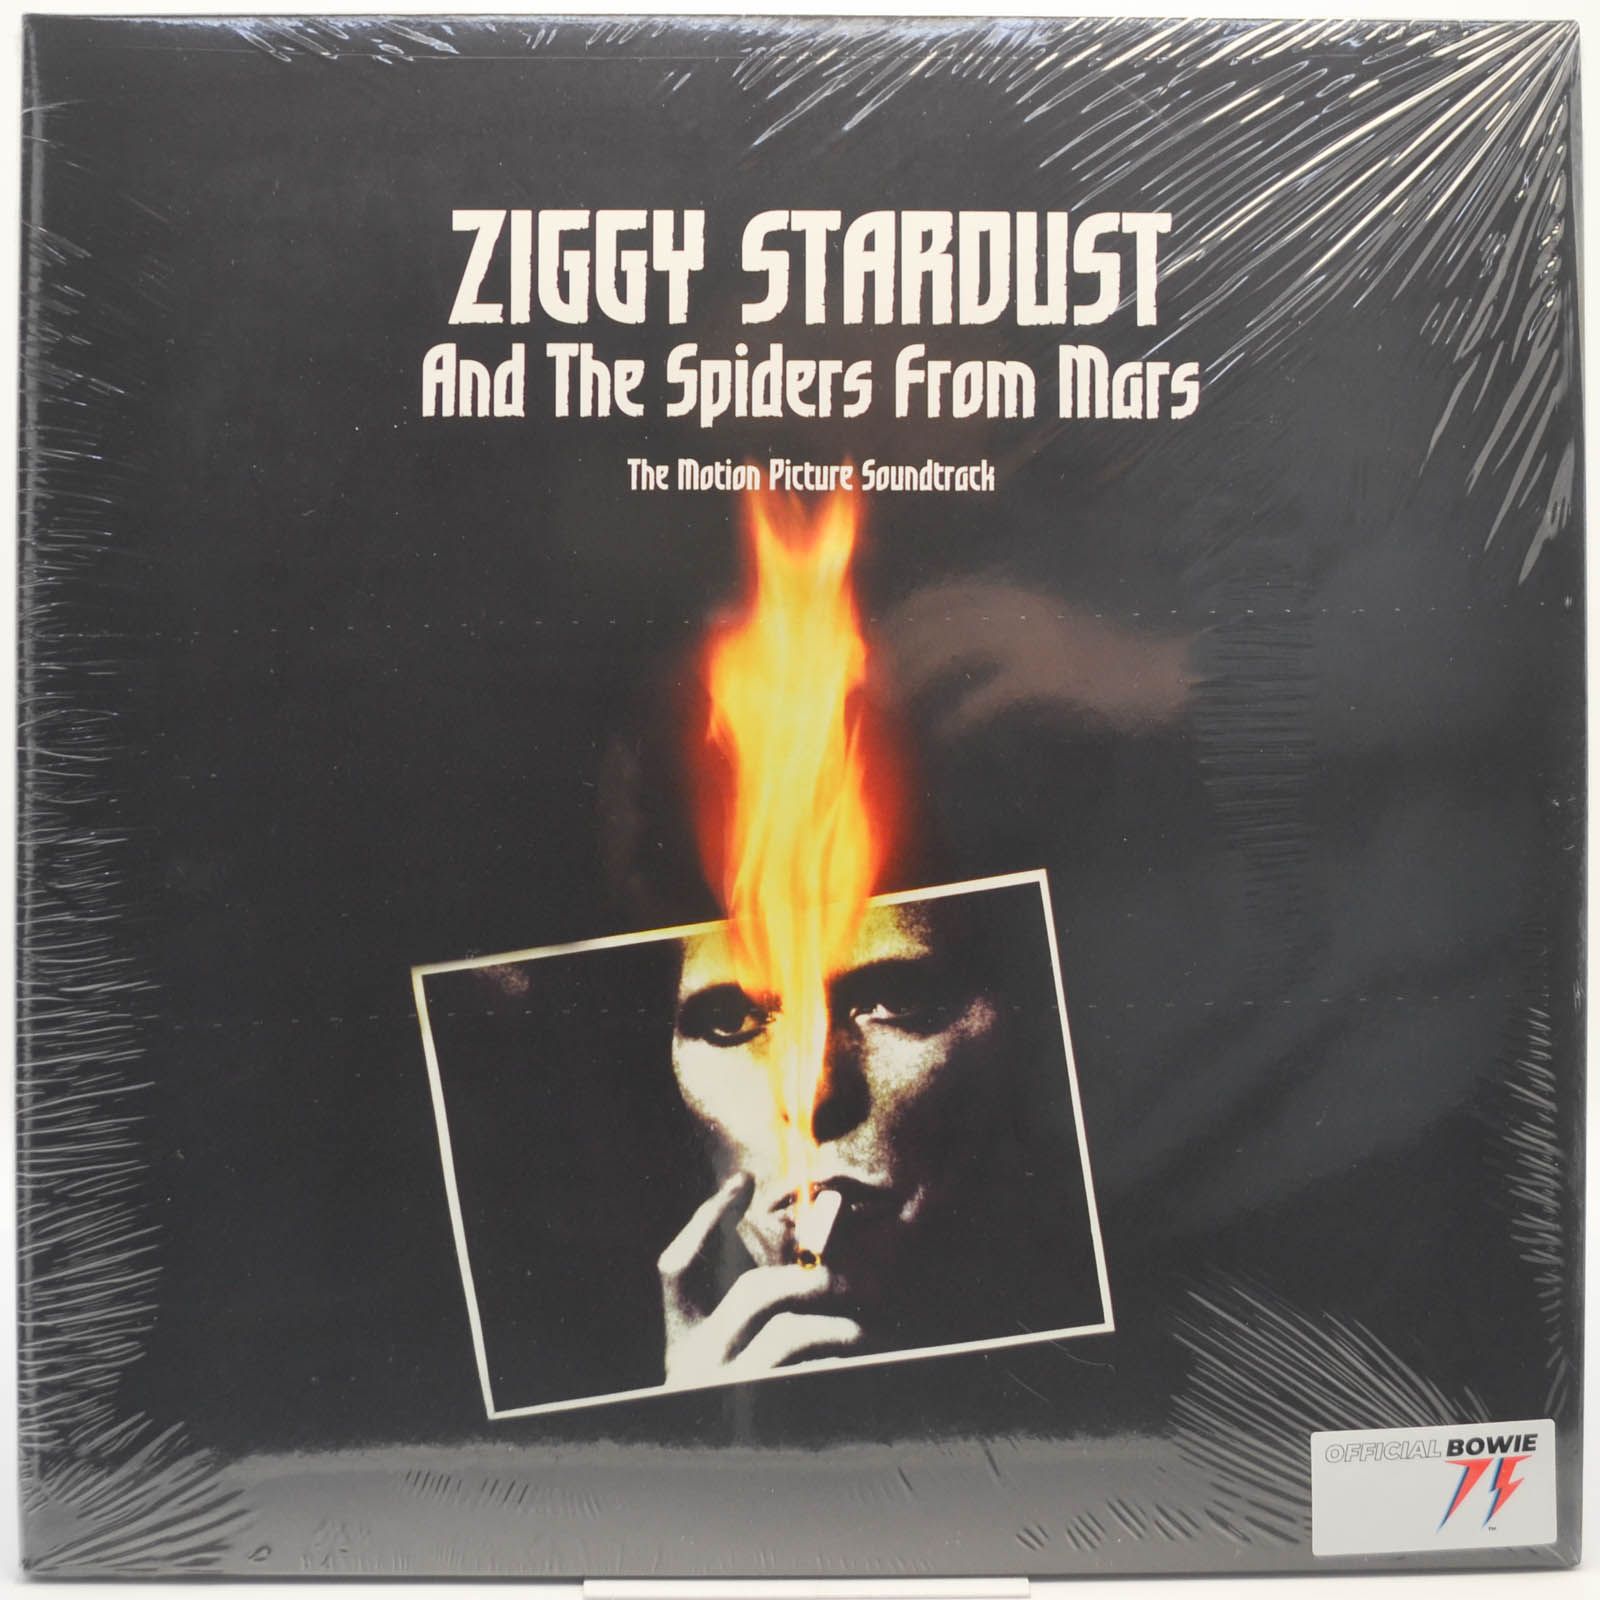 David Bowie — Ziggy Stardust And The Spiders From Mars (The Motion Picture Soundtrack) (2LP), 1983